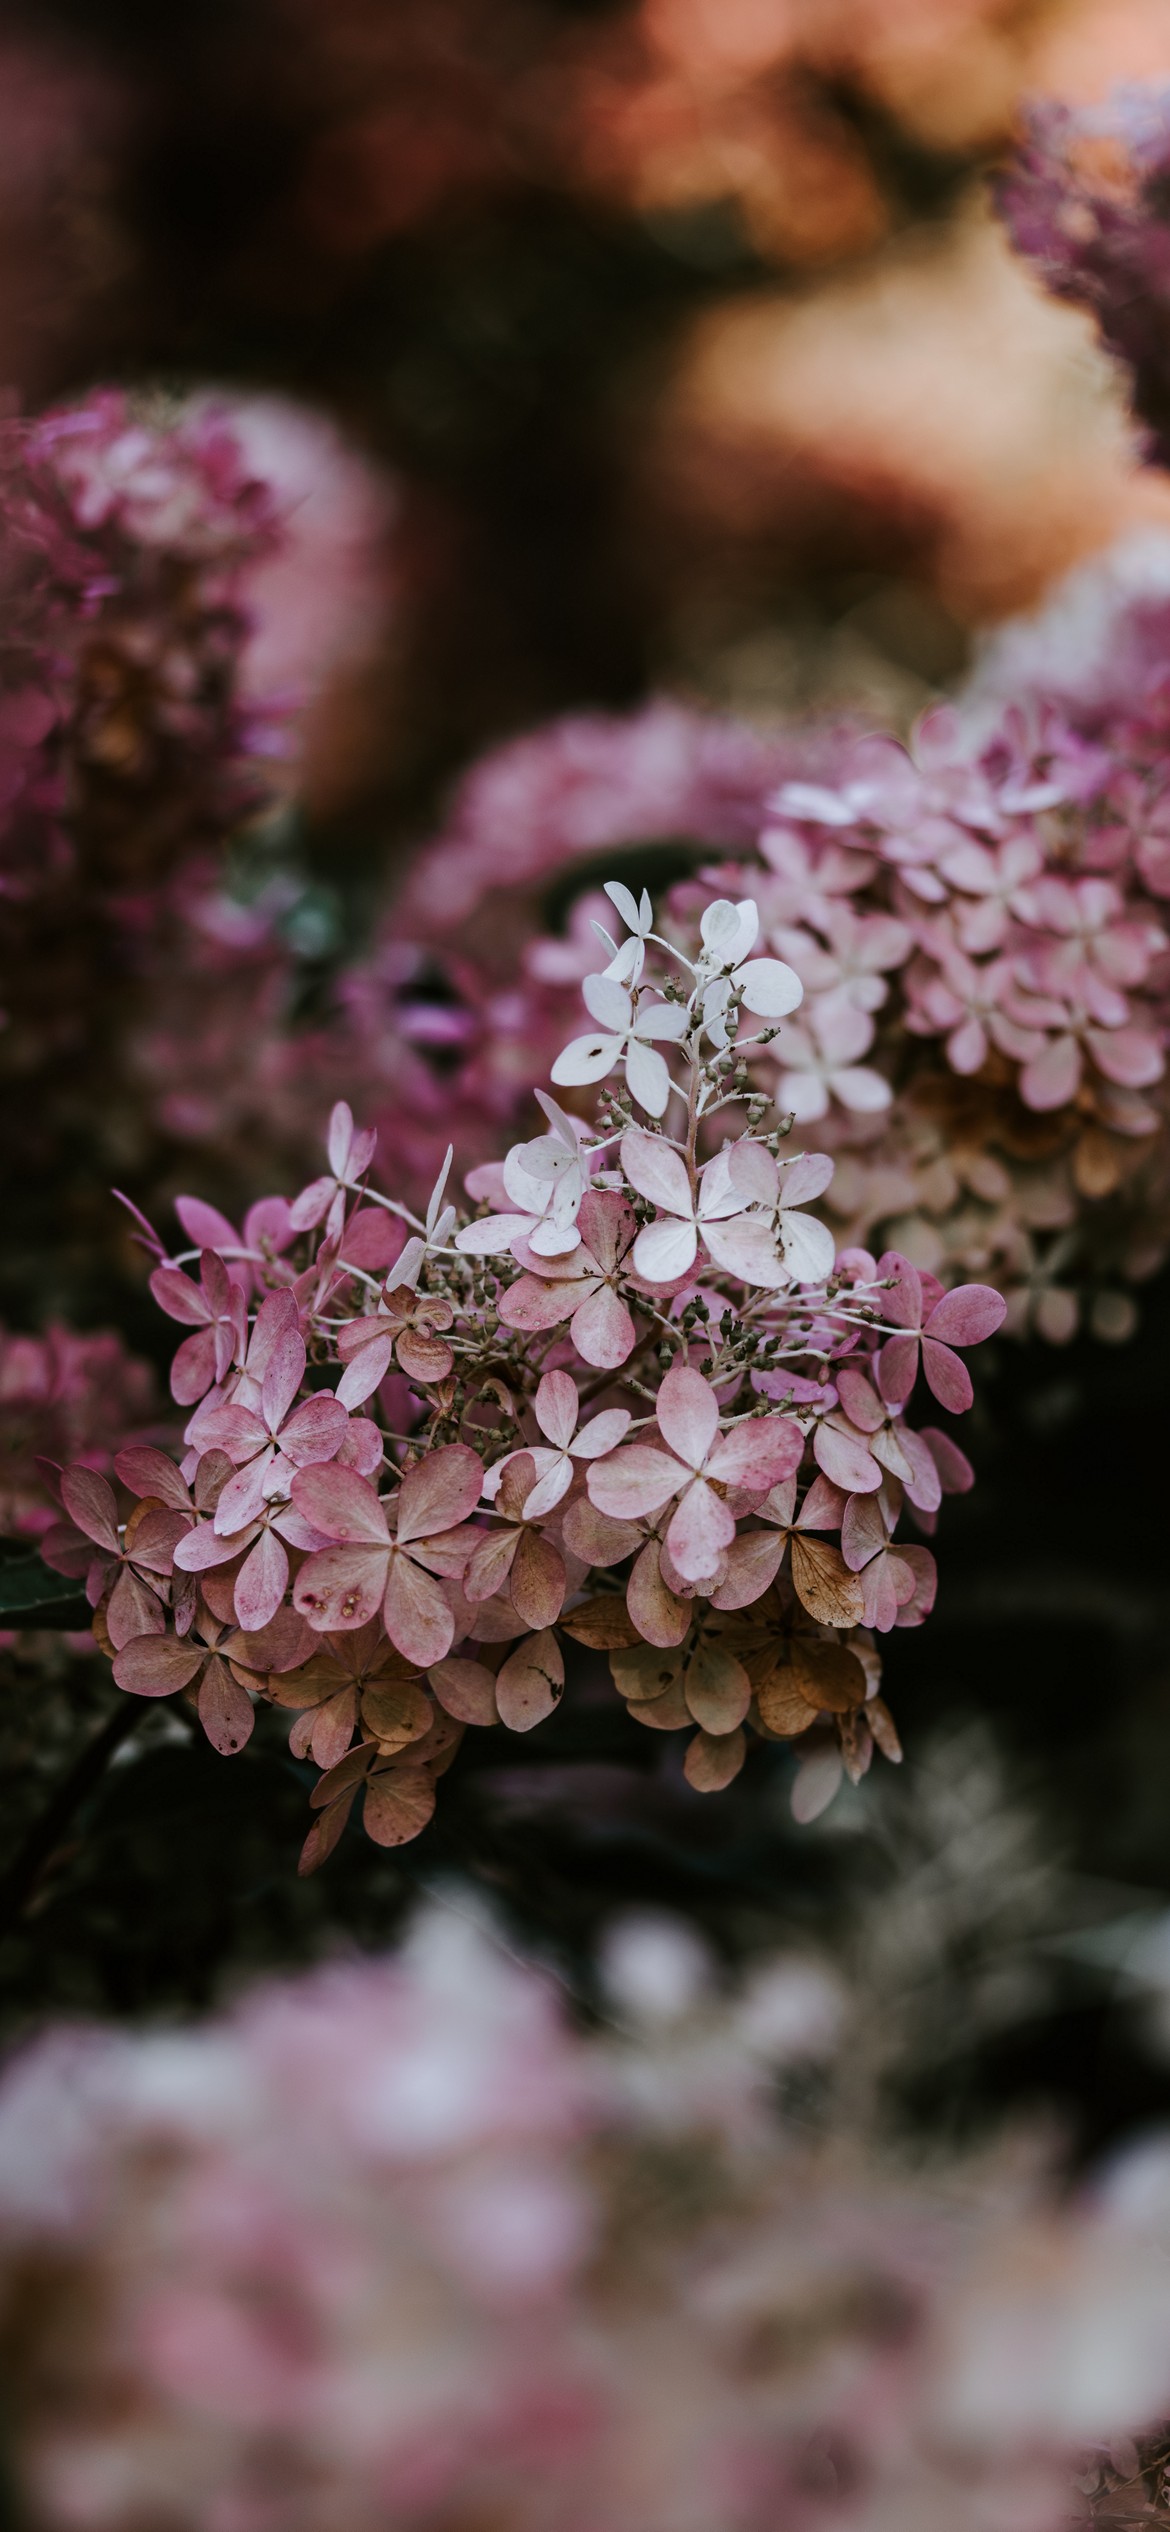 Aesthetic Flower Wallpapers for iPhone